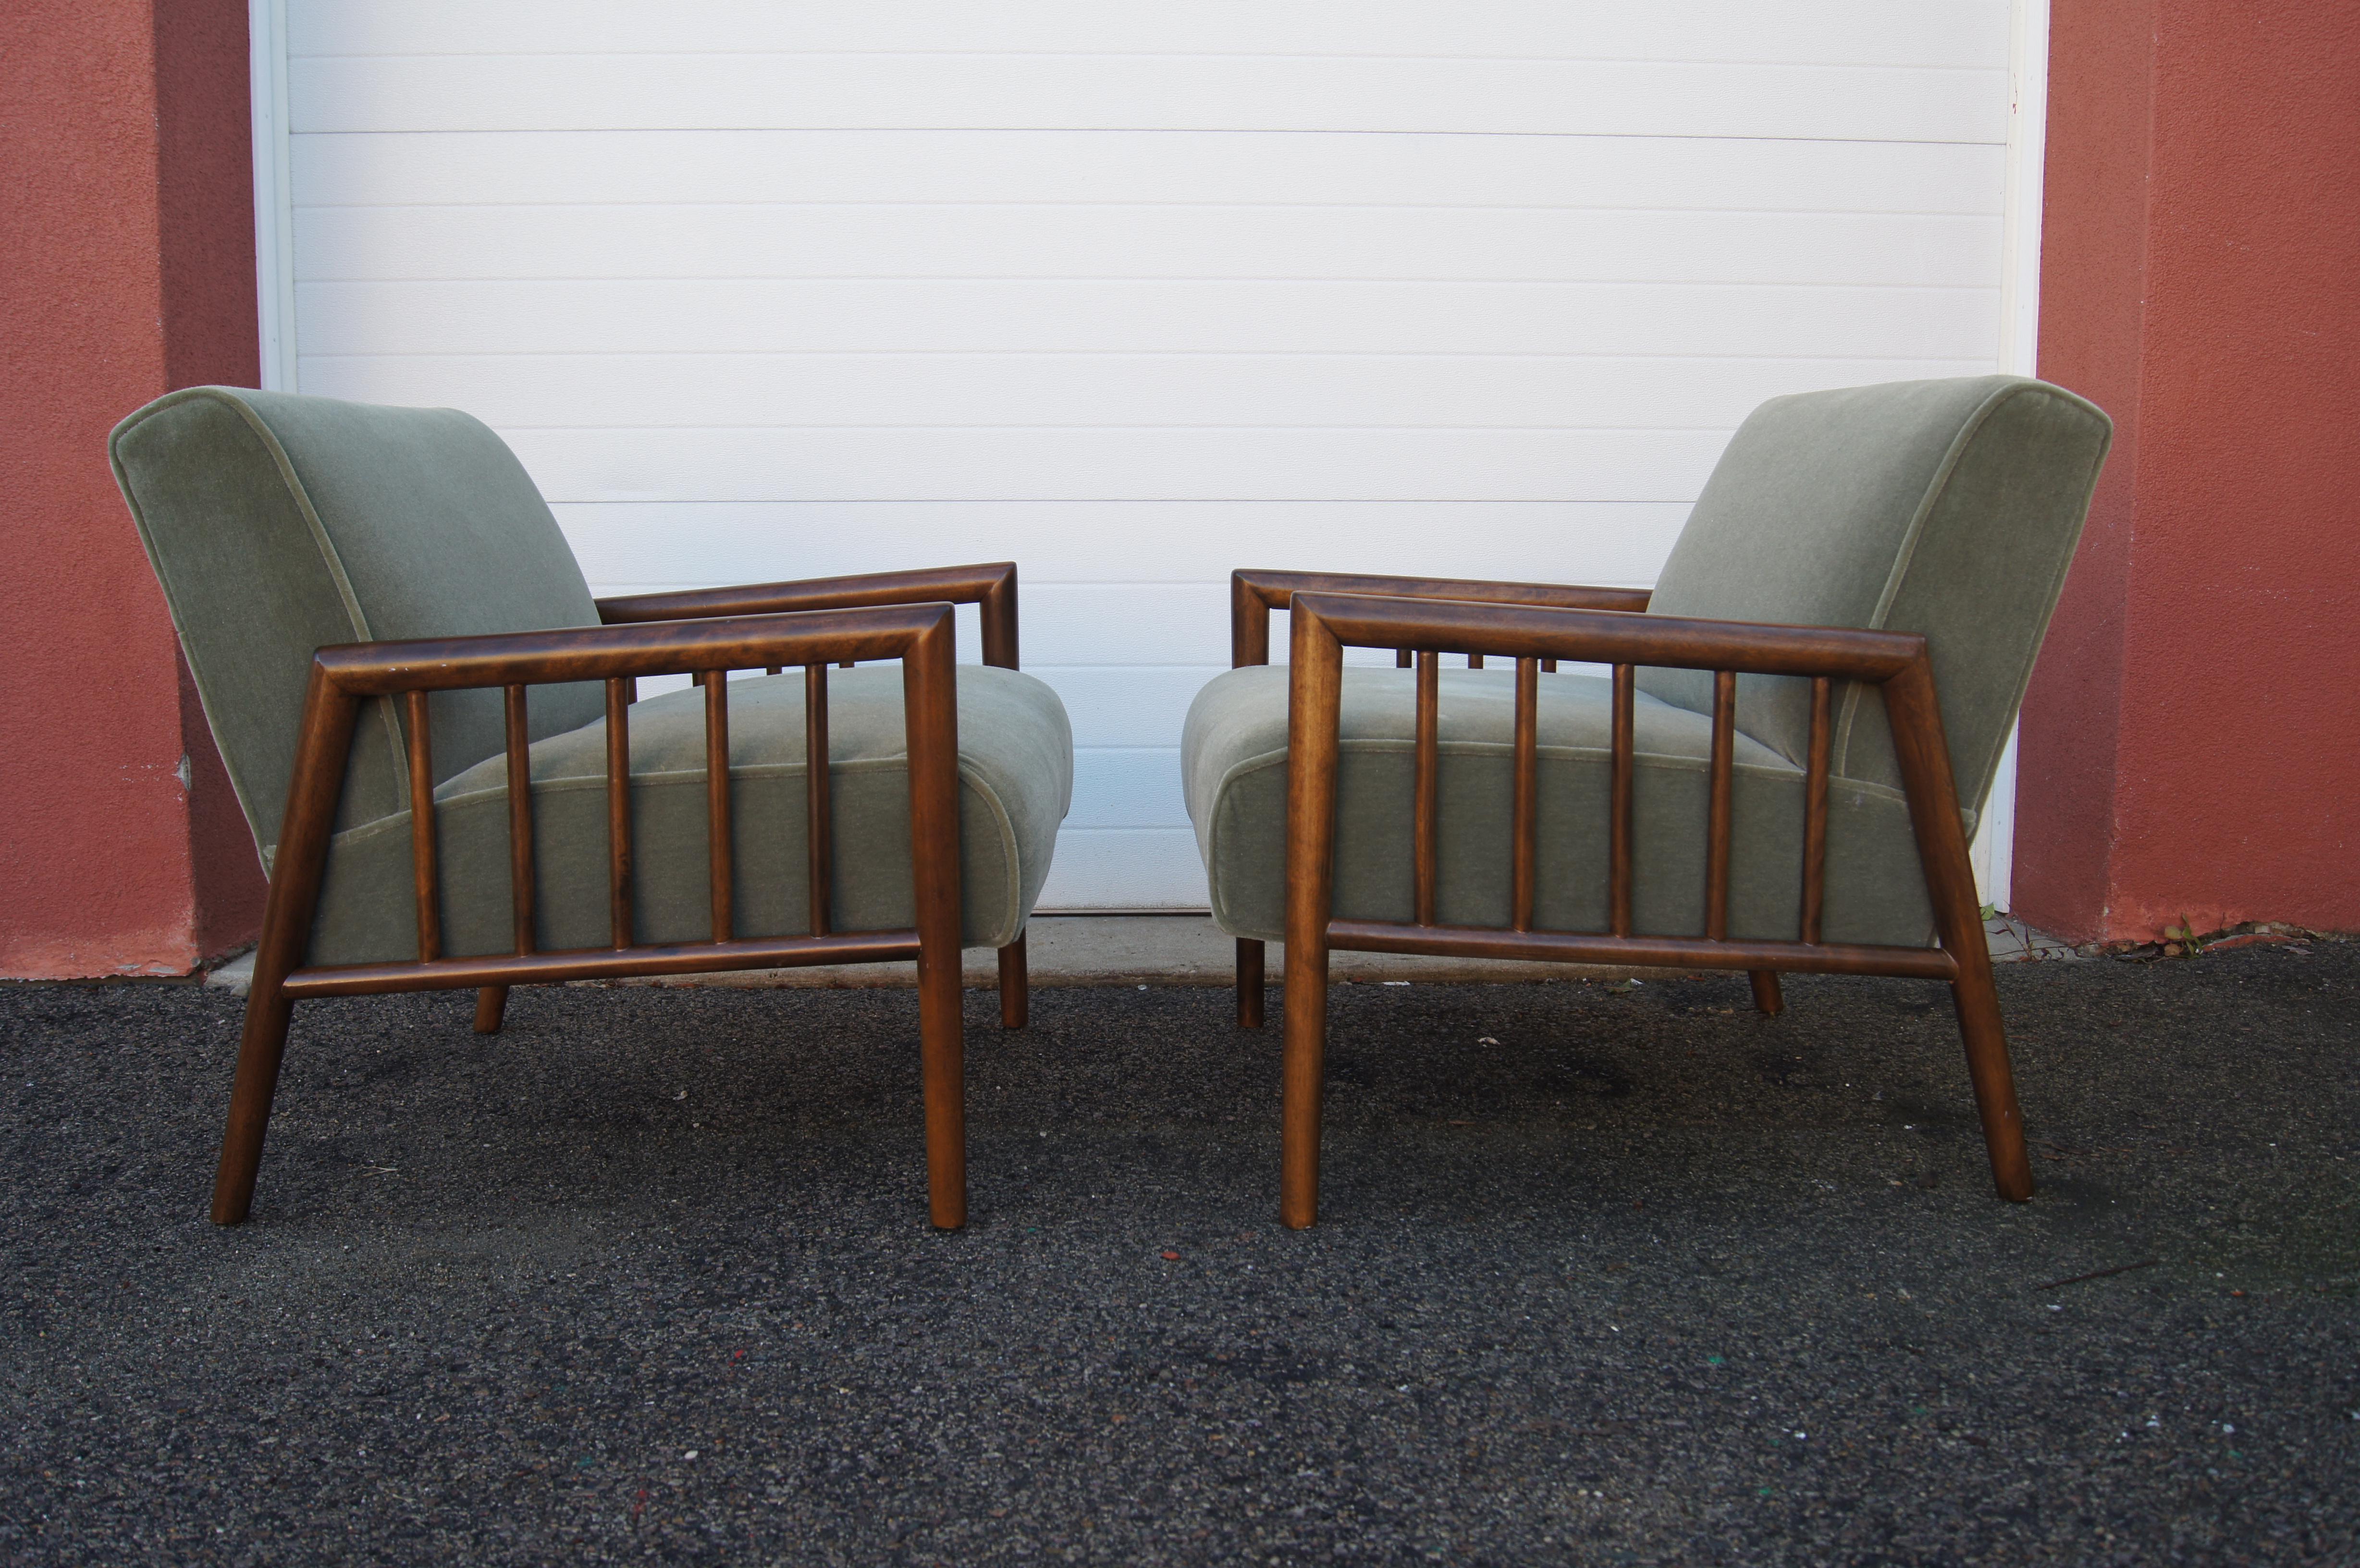 American Pair of Maple Lounge Chairs by Conant Ball, Attributed to Leslie Diamond